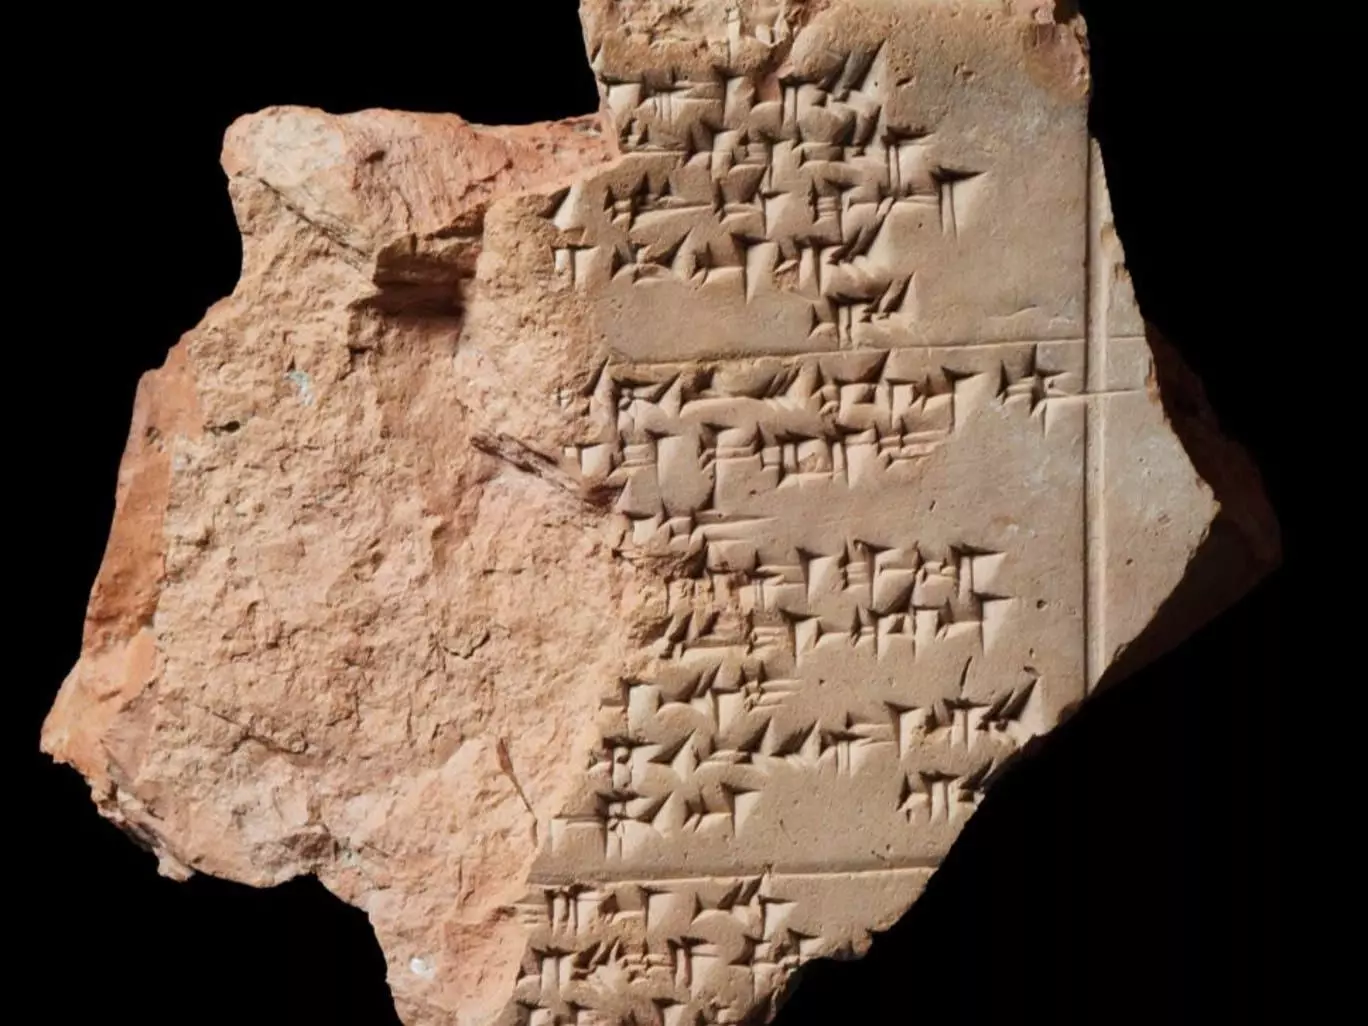 Unearthed: Archaeologists Illuminate a Lost Ancient Language hero image